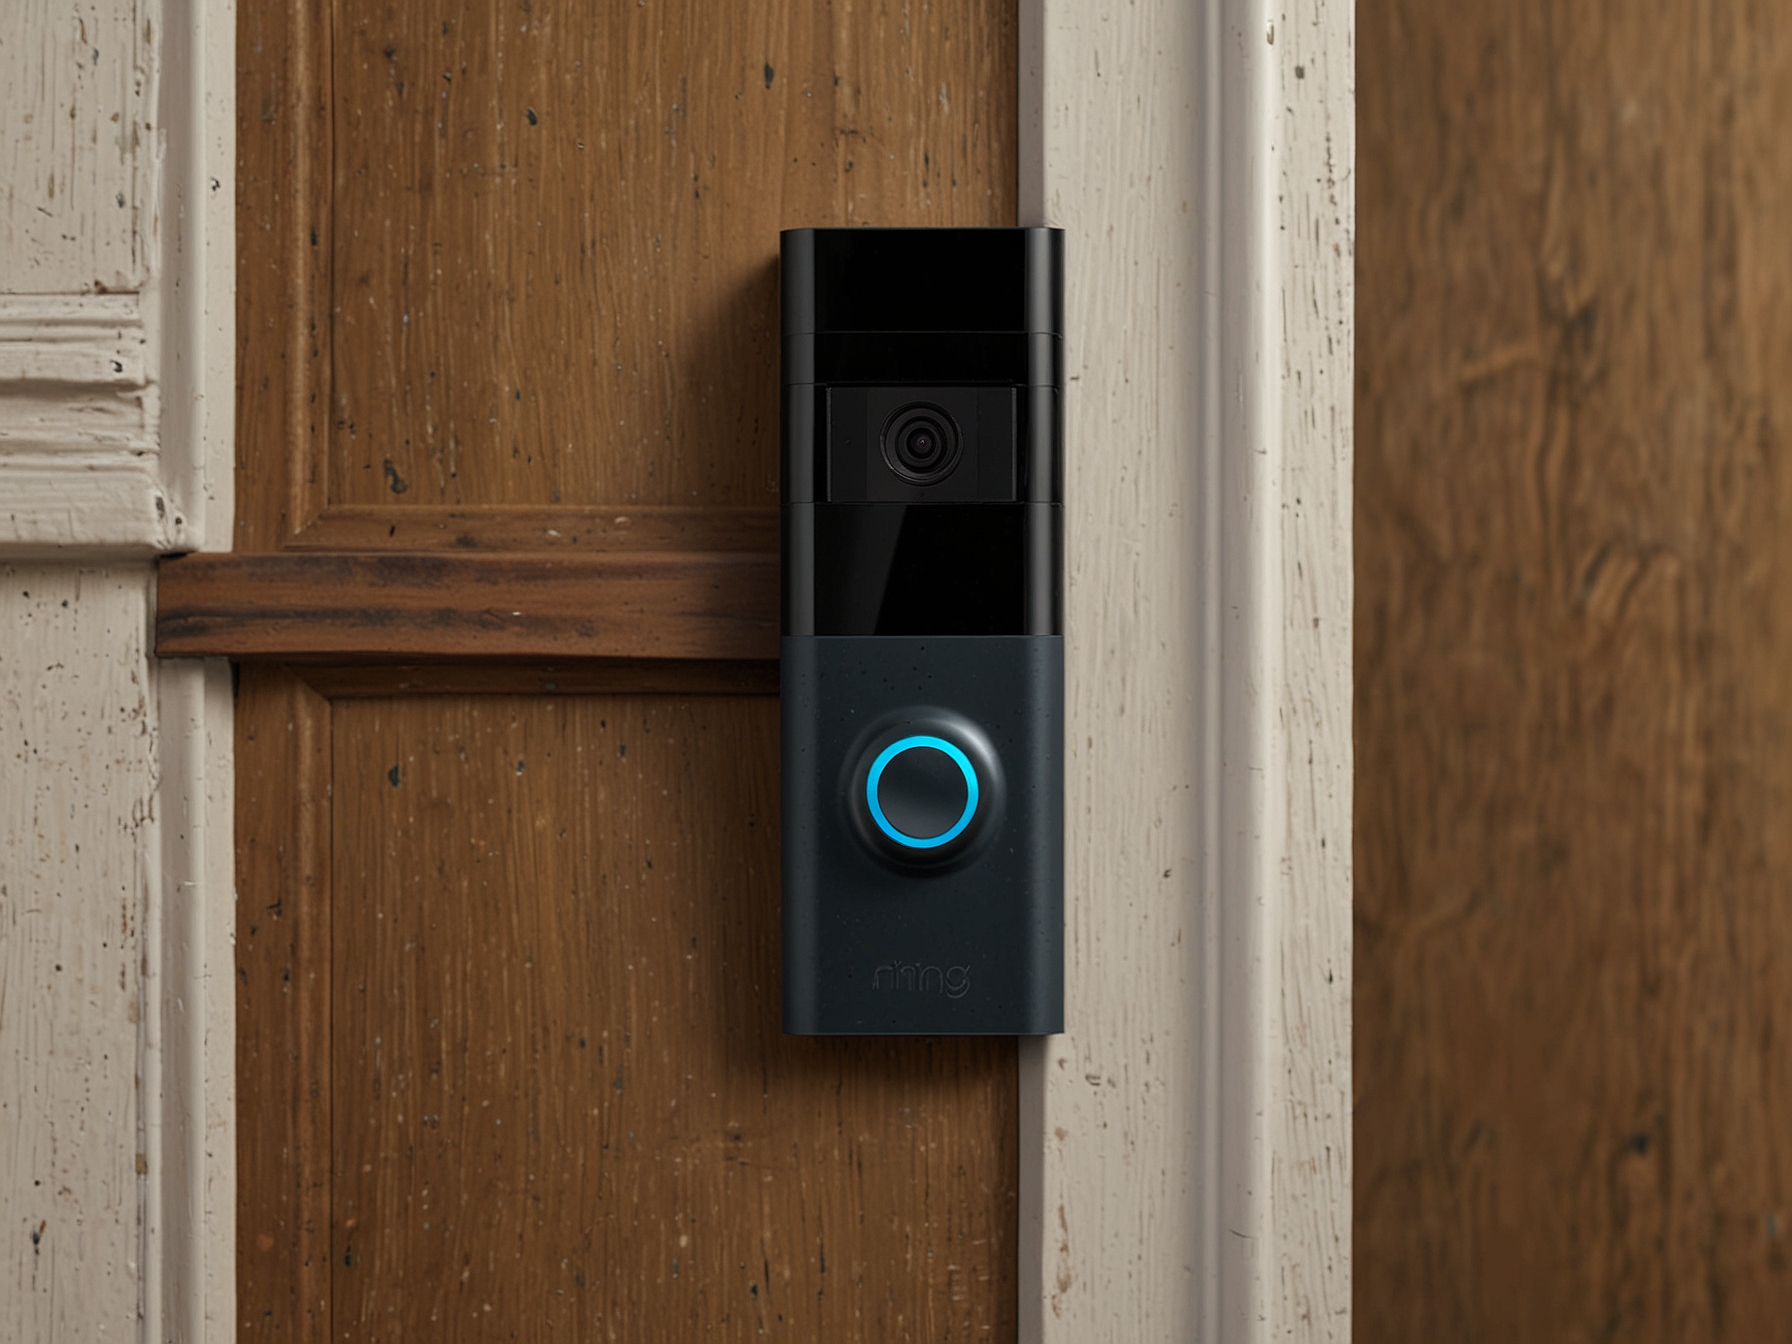 An image of a homeowner installing the Ring Video Doorbell on their front door. The 1080p high-definition camera and sleek design highlight its advanced features and easy setup.